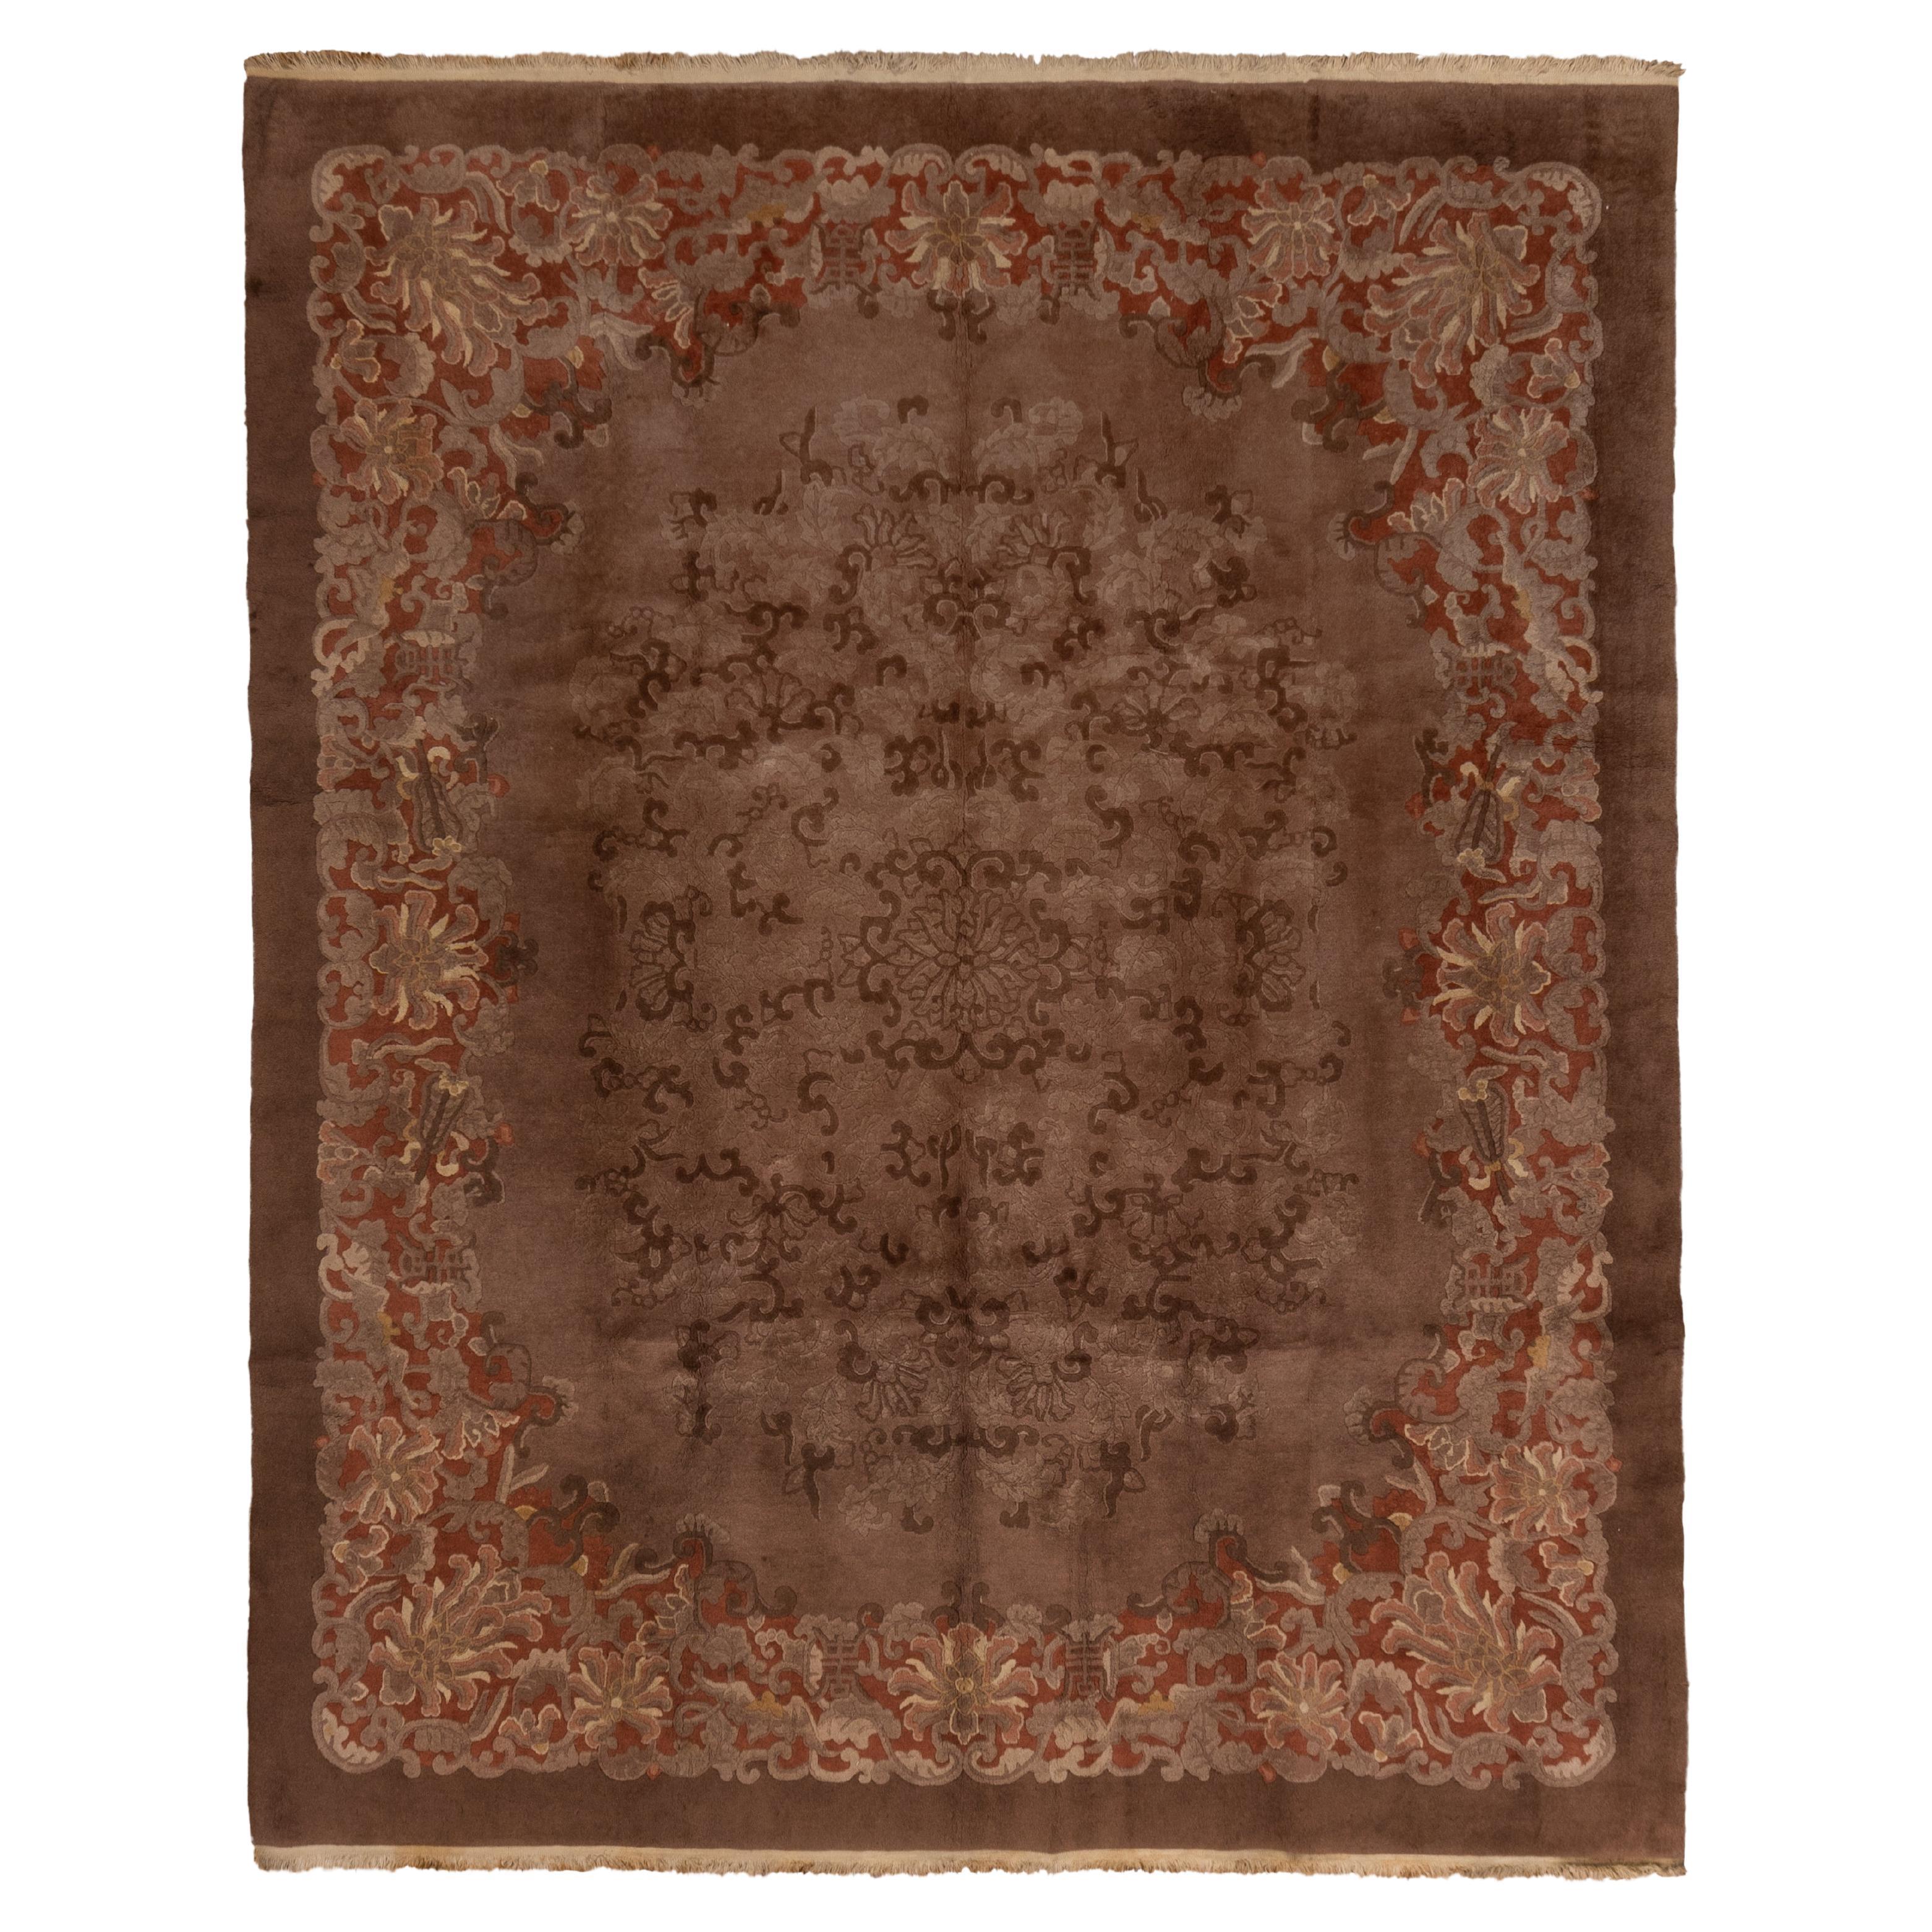 Antique Fette Chinese Rug with Light Brown Tone on Tone Colors